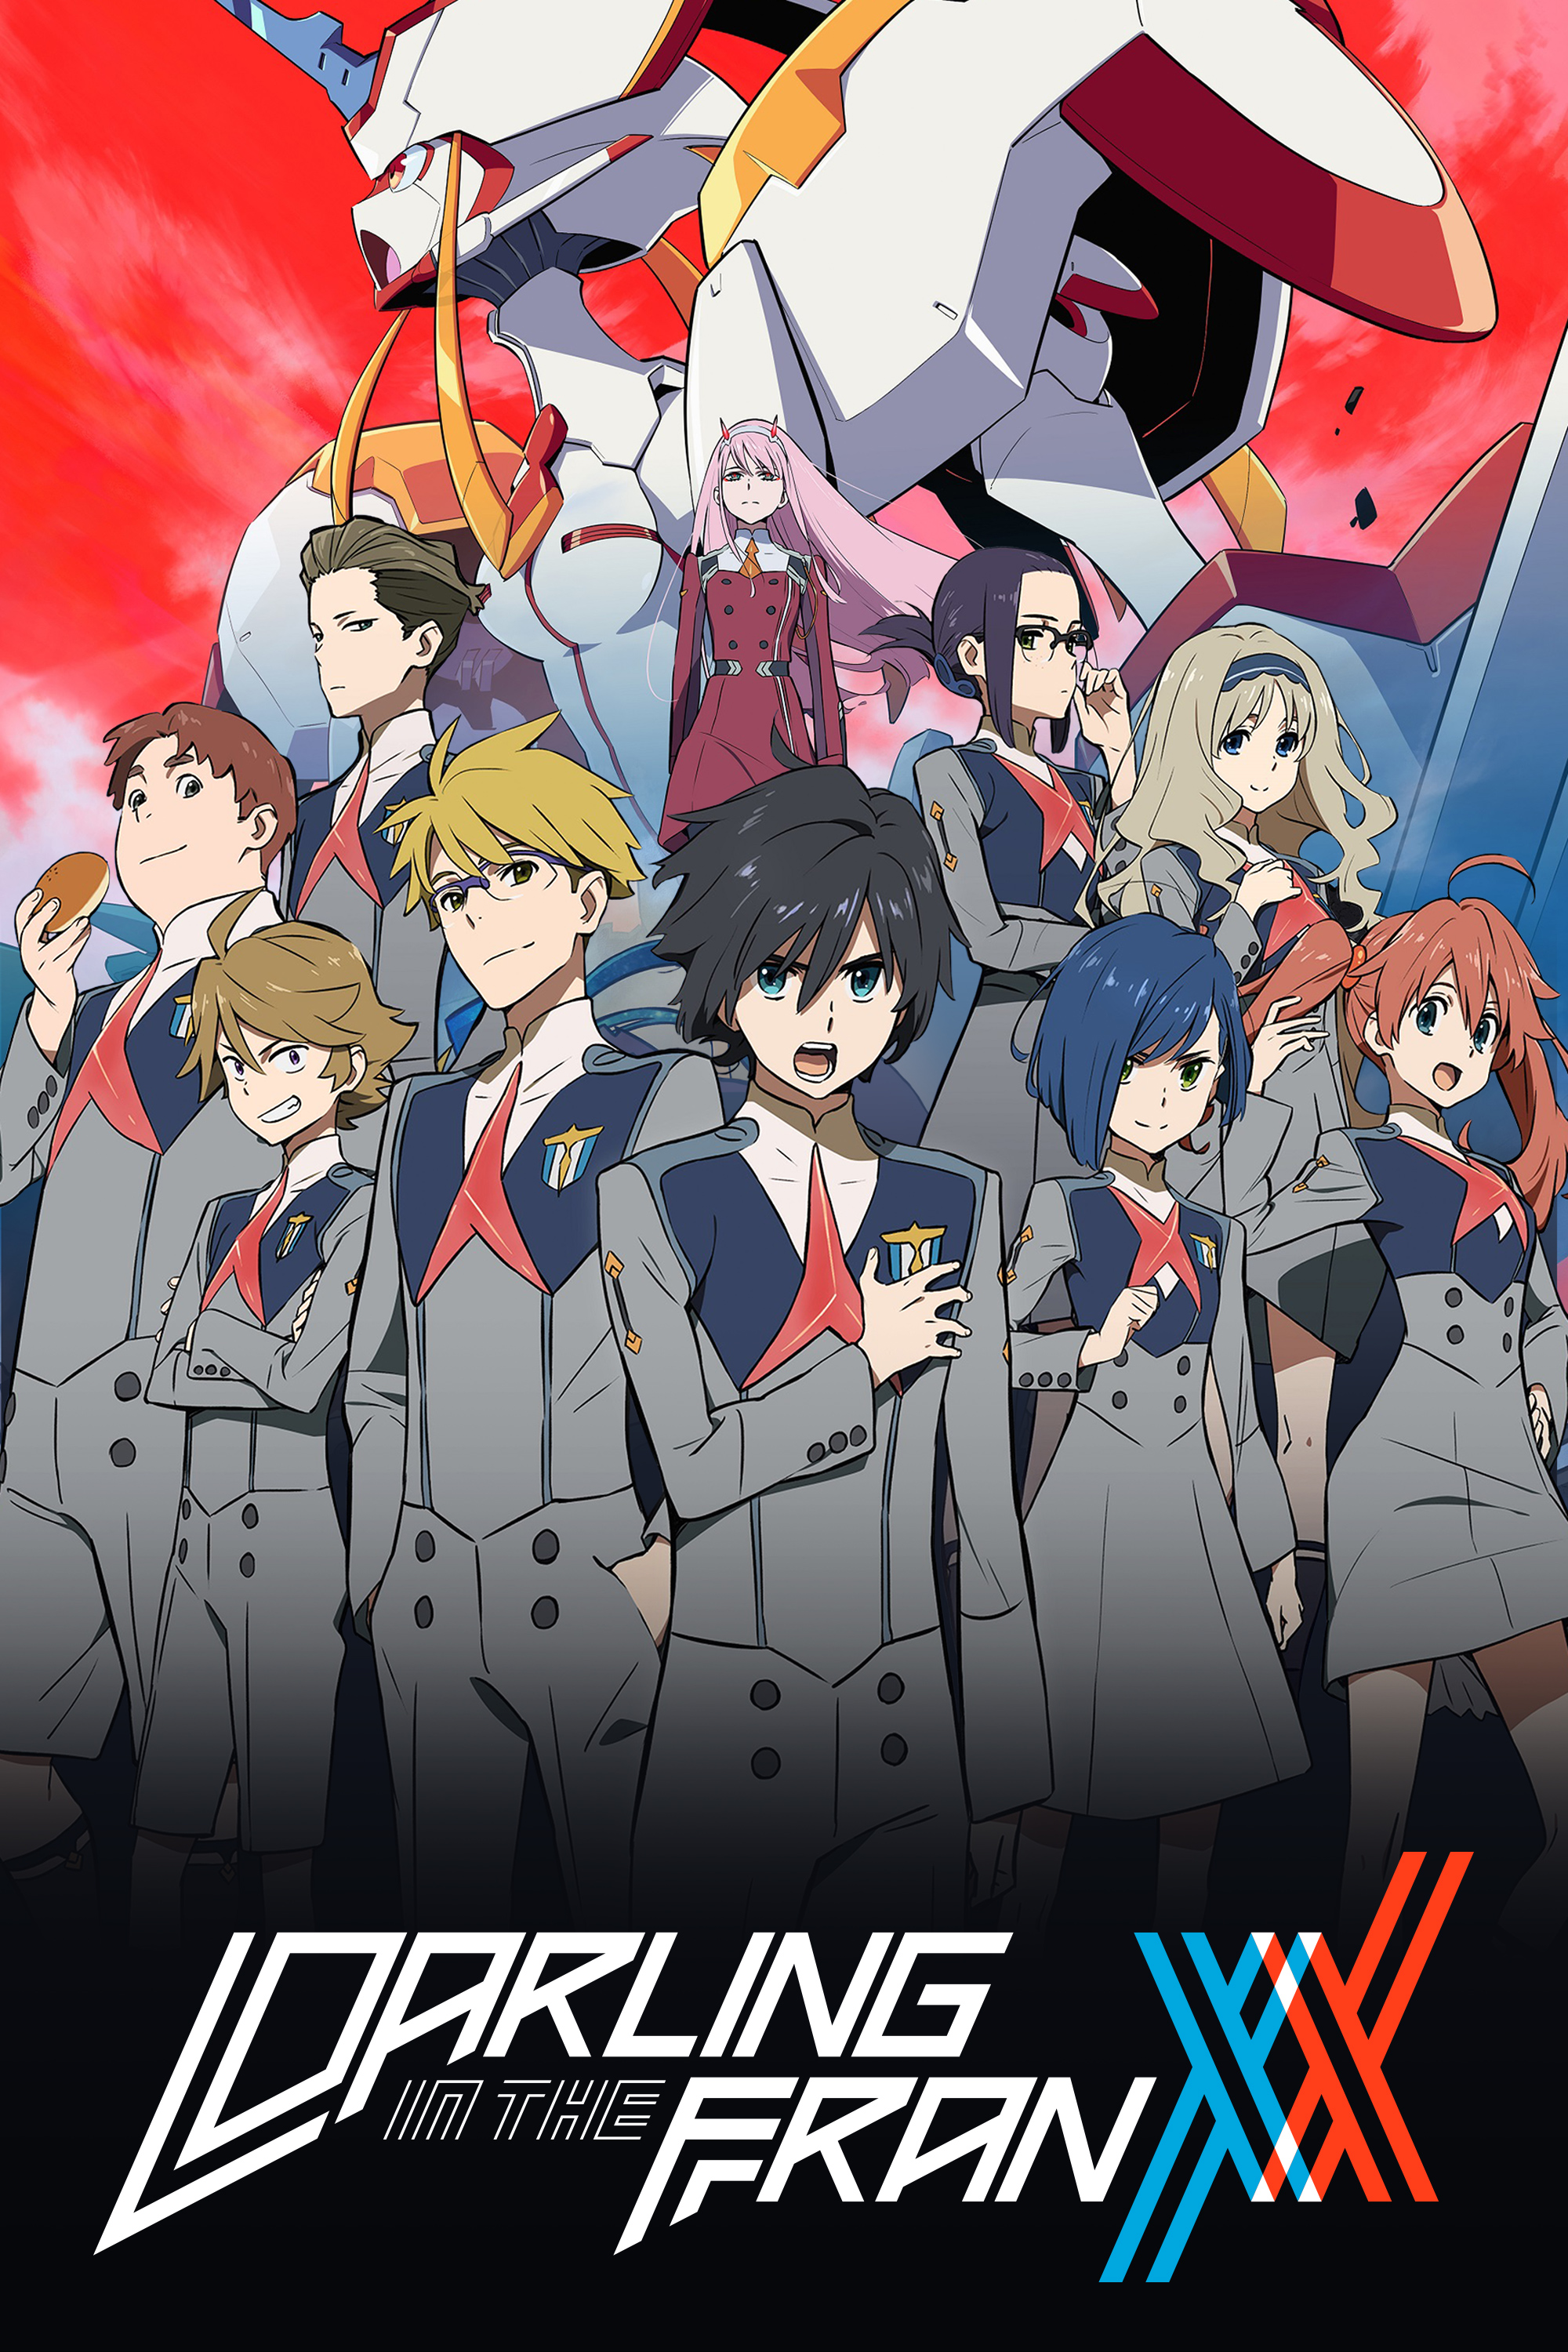 DARLING in the FRANXX | Watch on Funimation